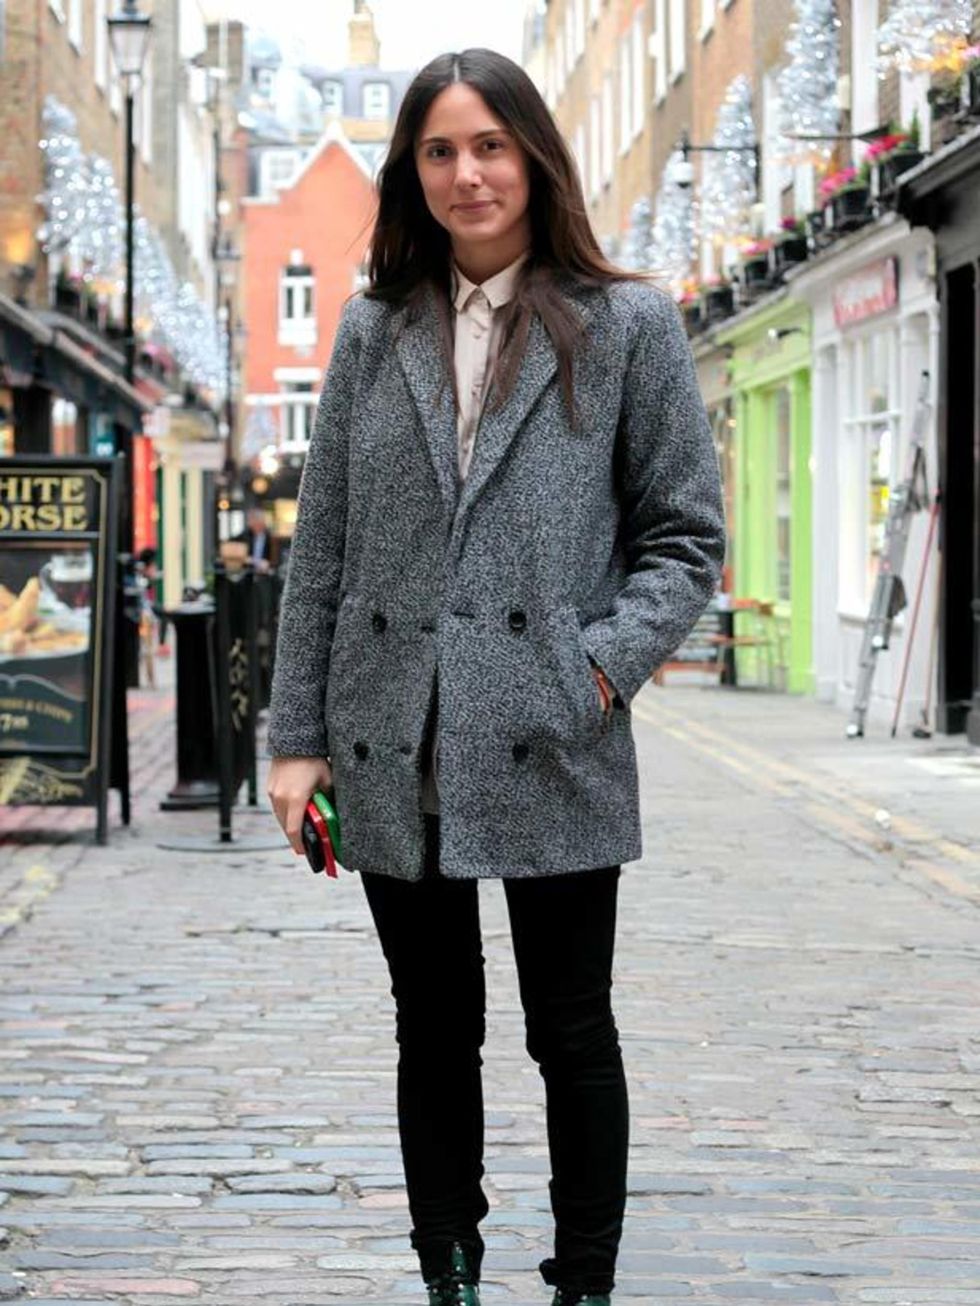 <p>Photo by Anthea Sims.Paula, 24, Strategist. Weekday jacket, Cos shirt, Whyred jeans and vintage boots.</p>